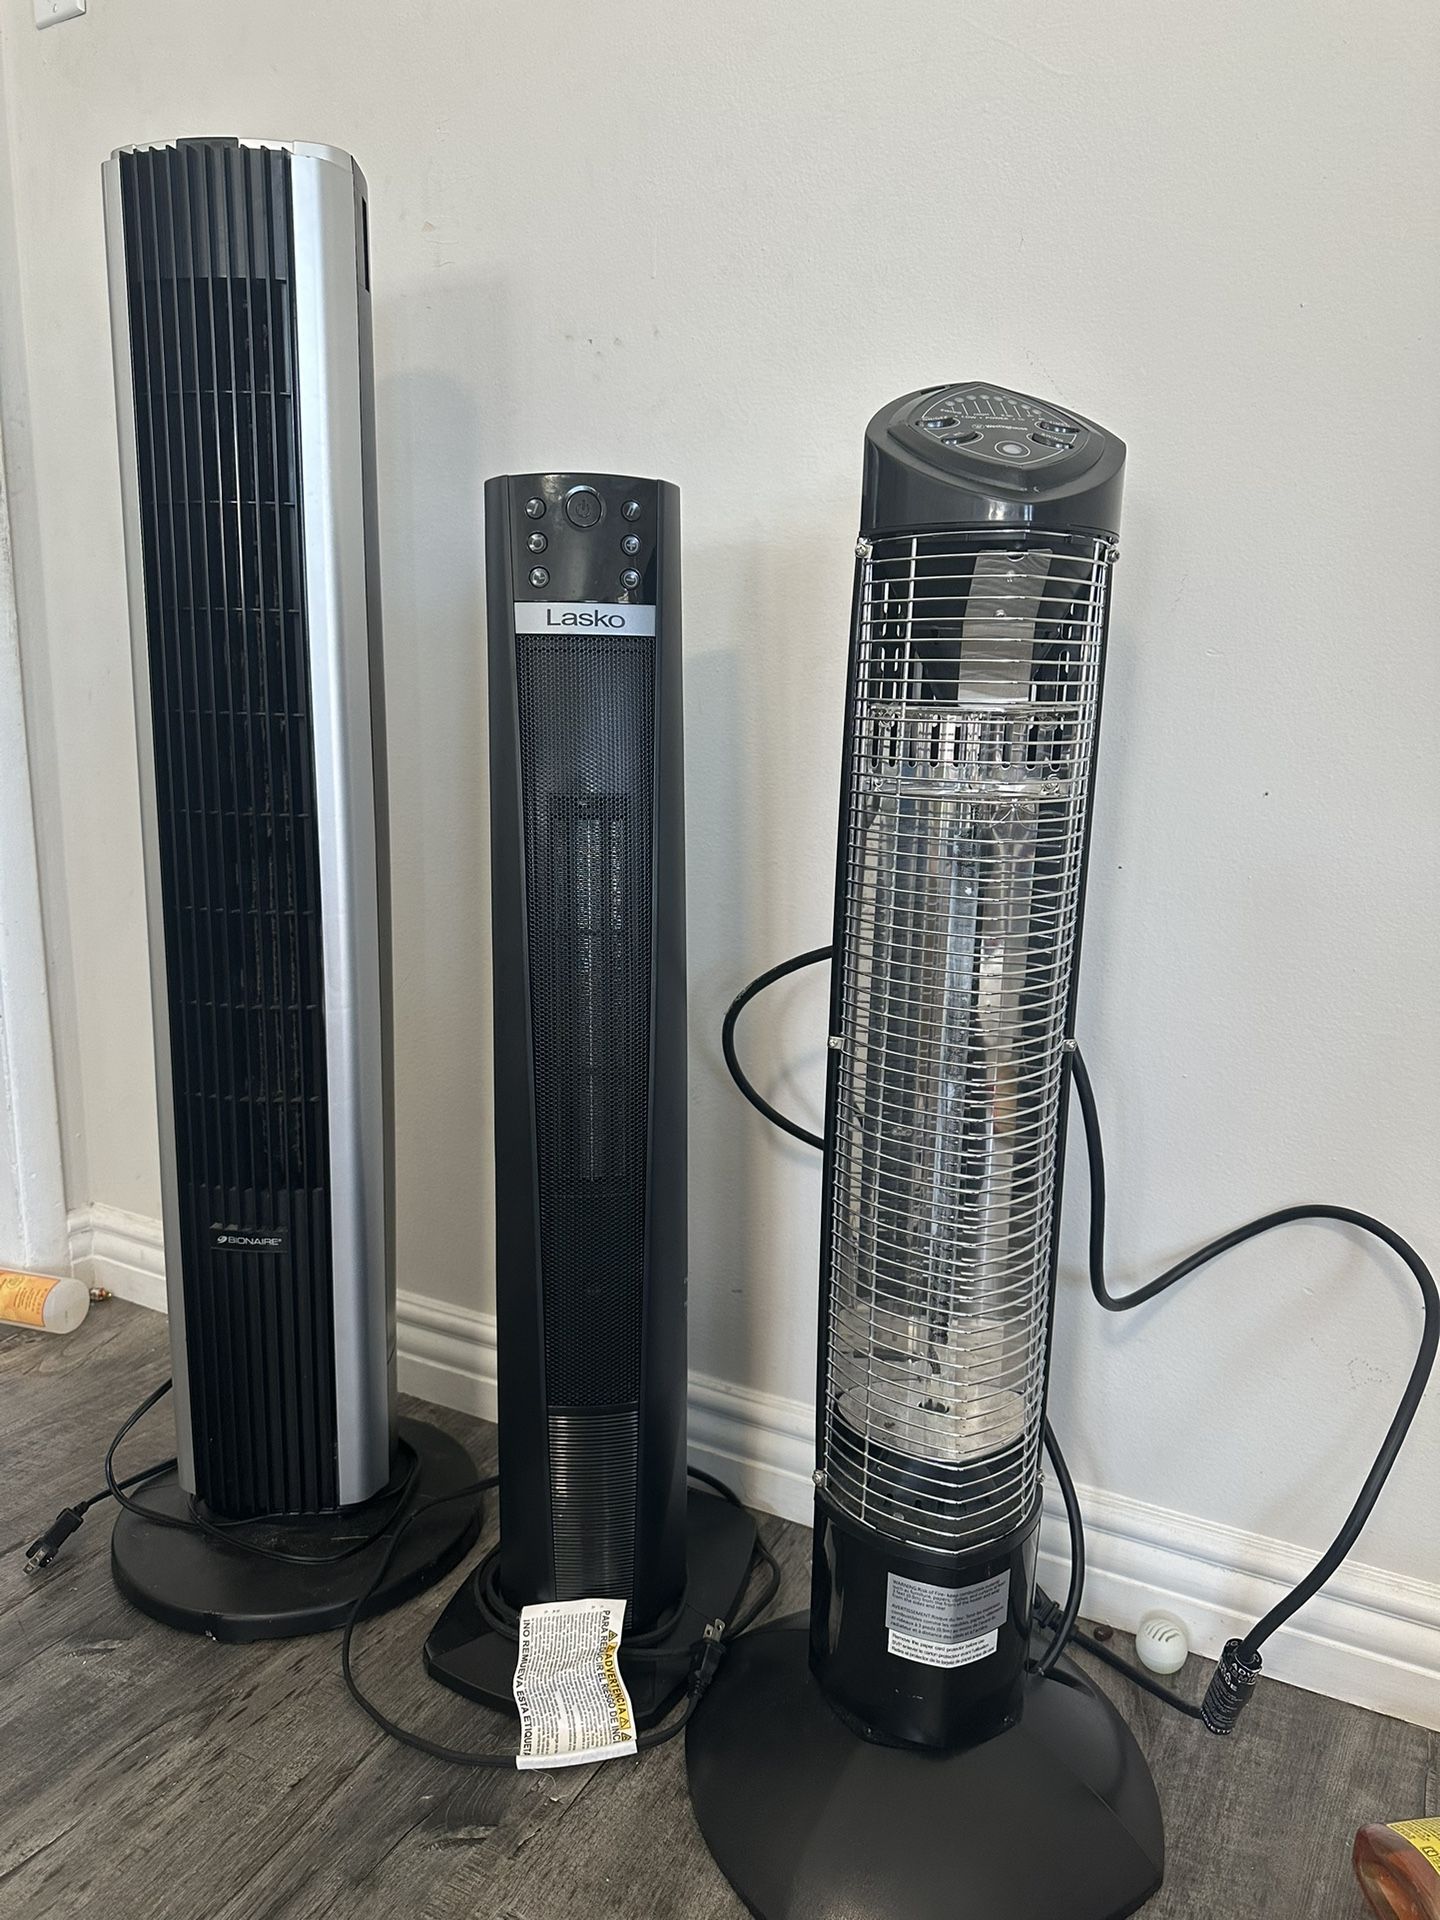 Fan Tower, Heater. In Good Condition.